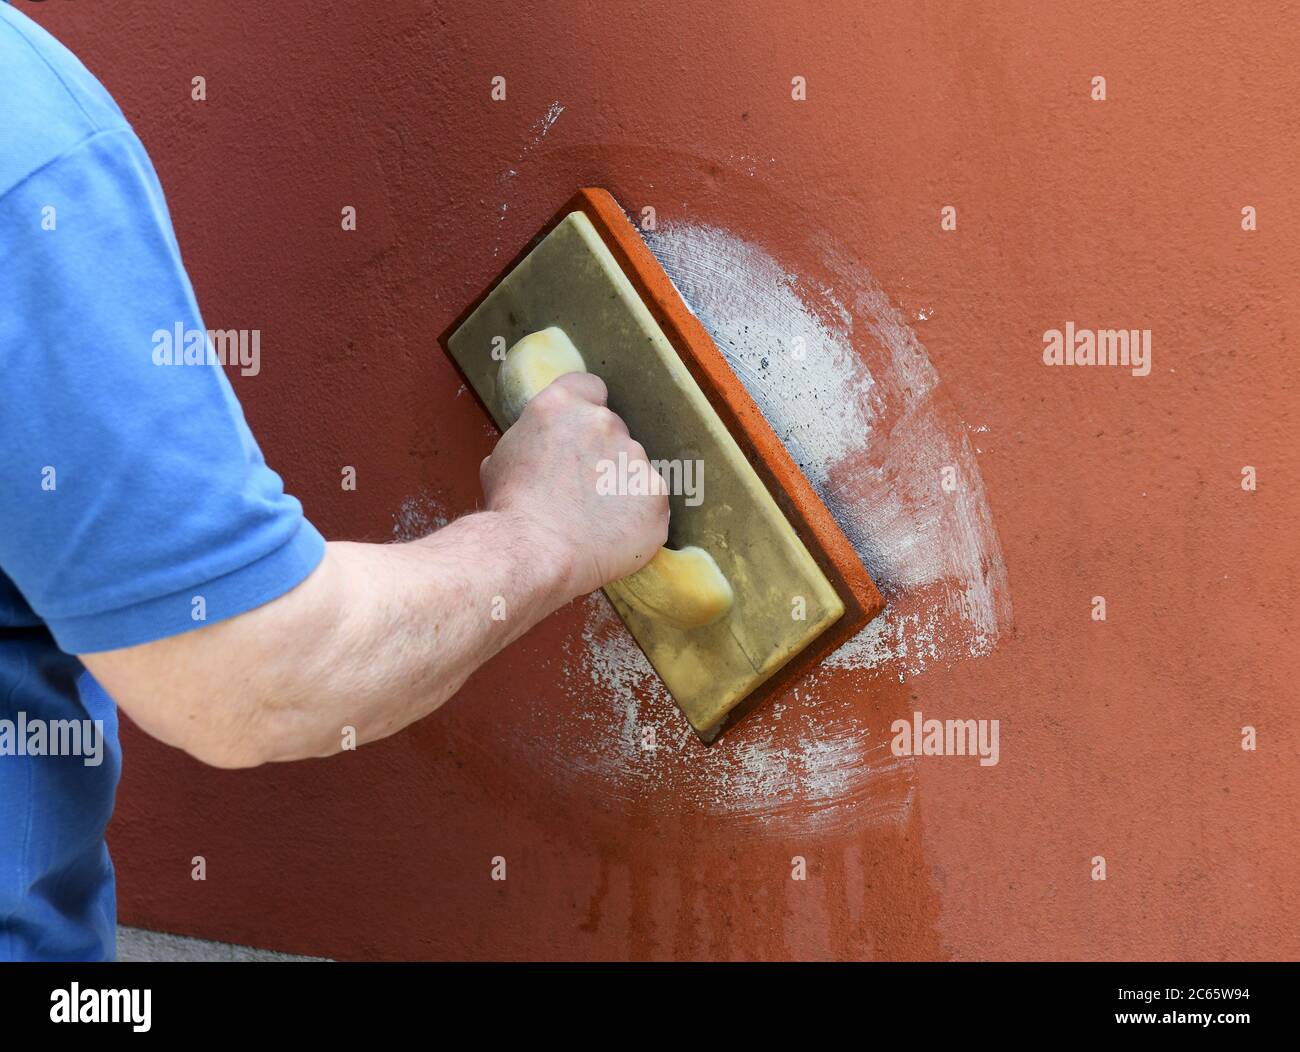 Bricklayer grouting masonry on a colored wall in a close up on his hand as he applies the grout in a maintenance, construction or renovation concept Stock Photo